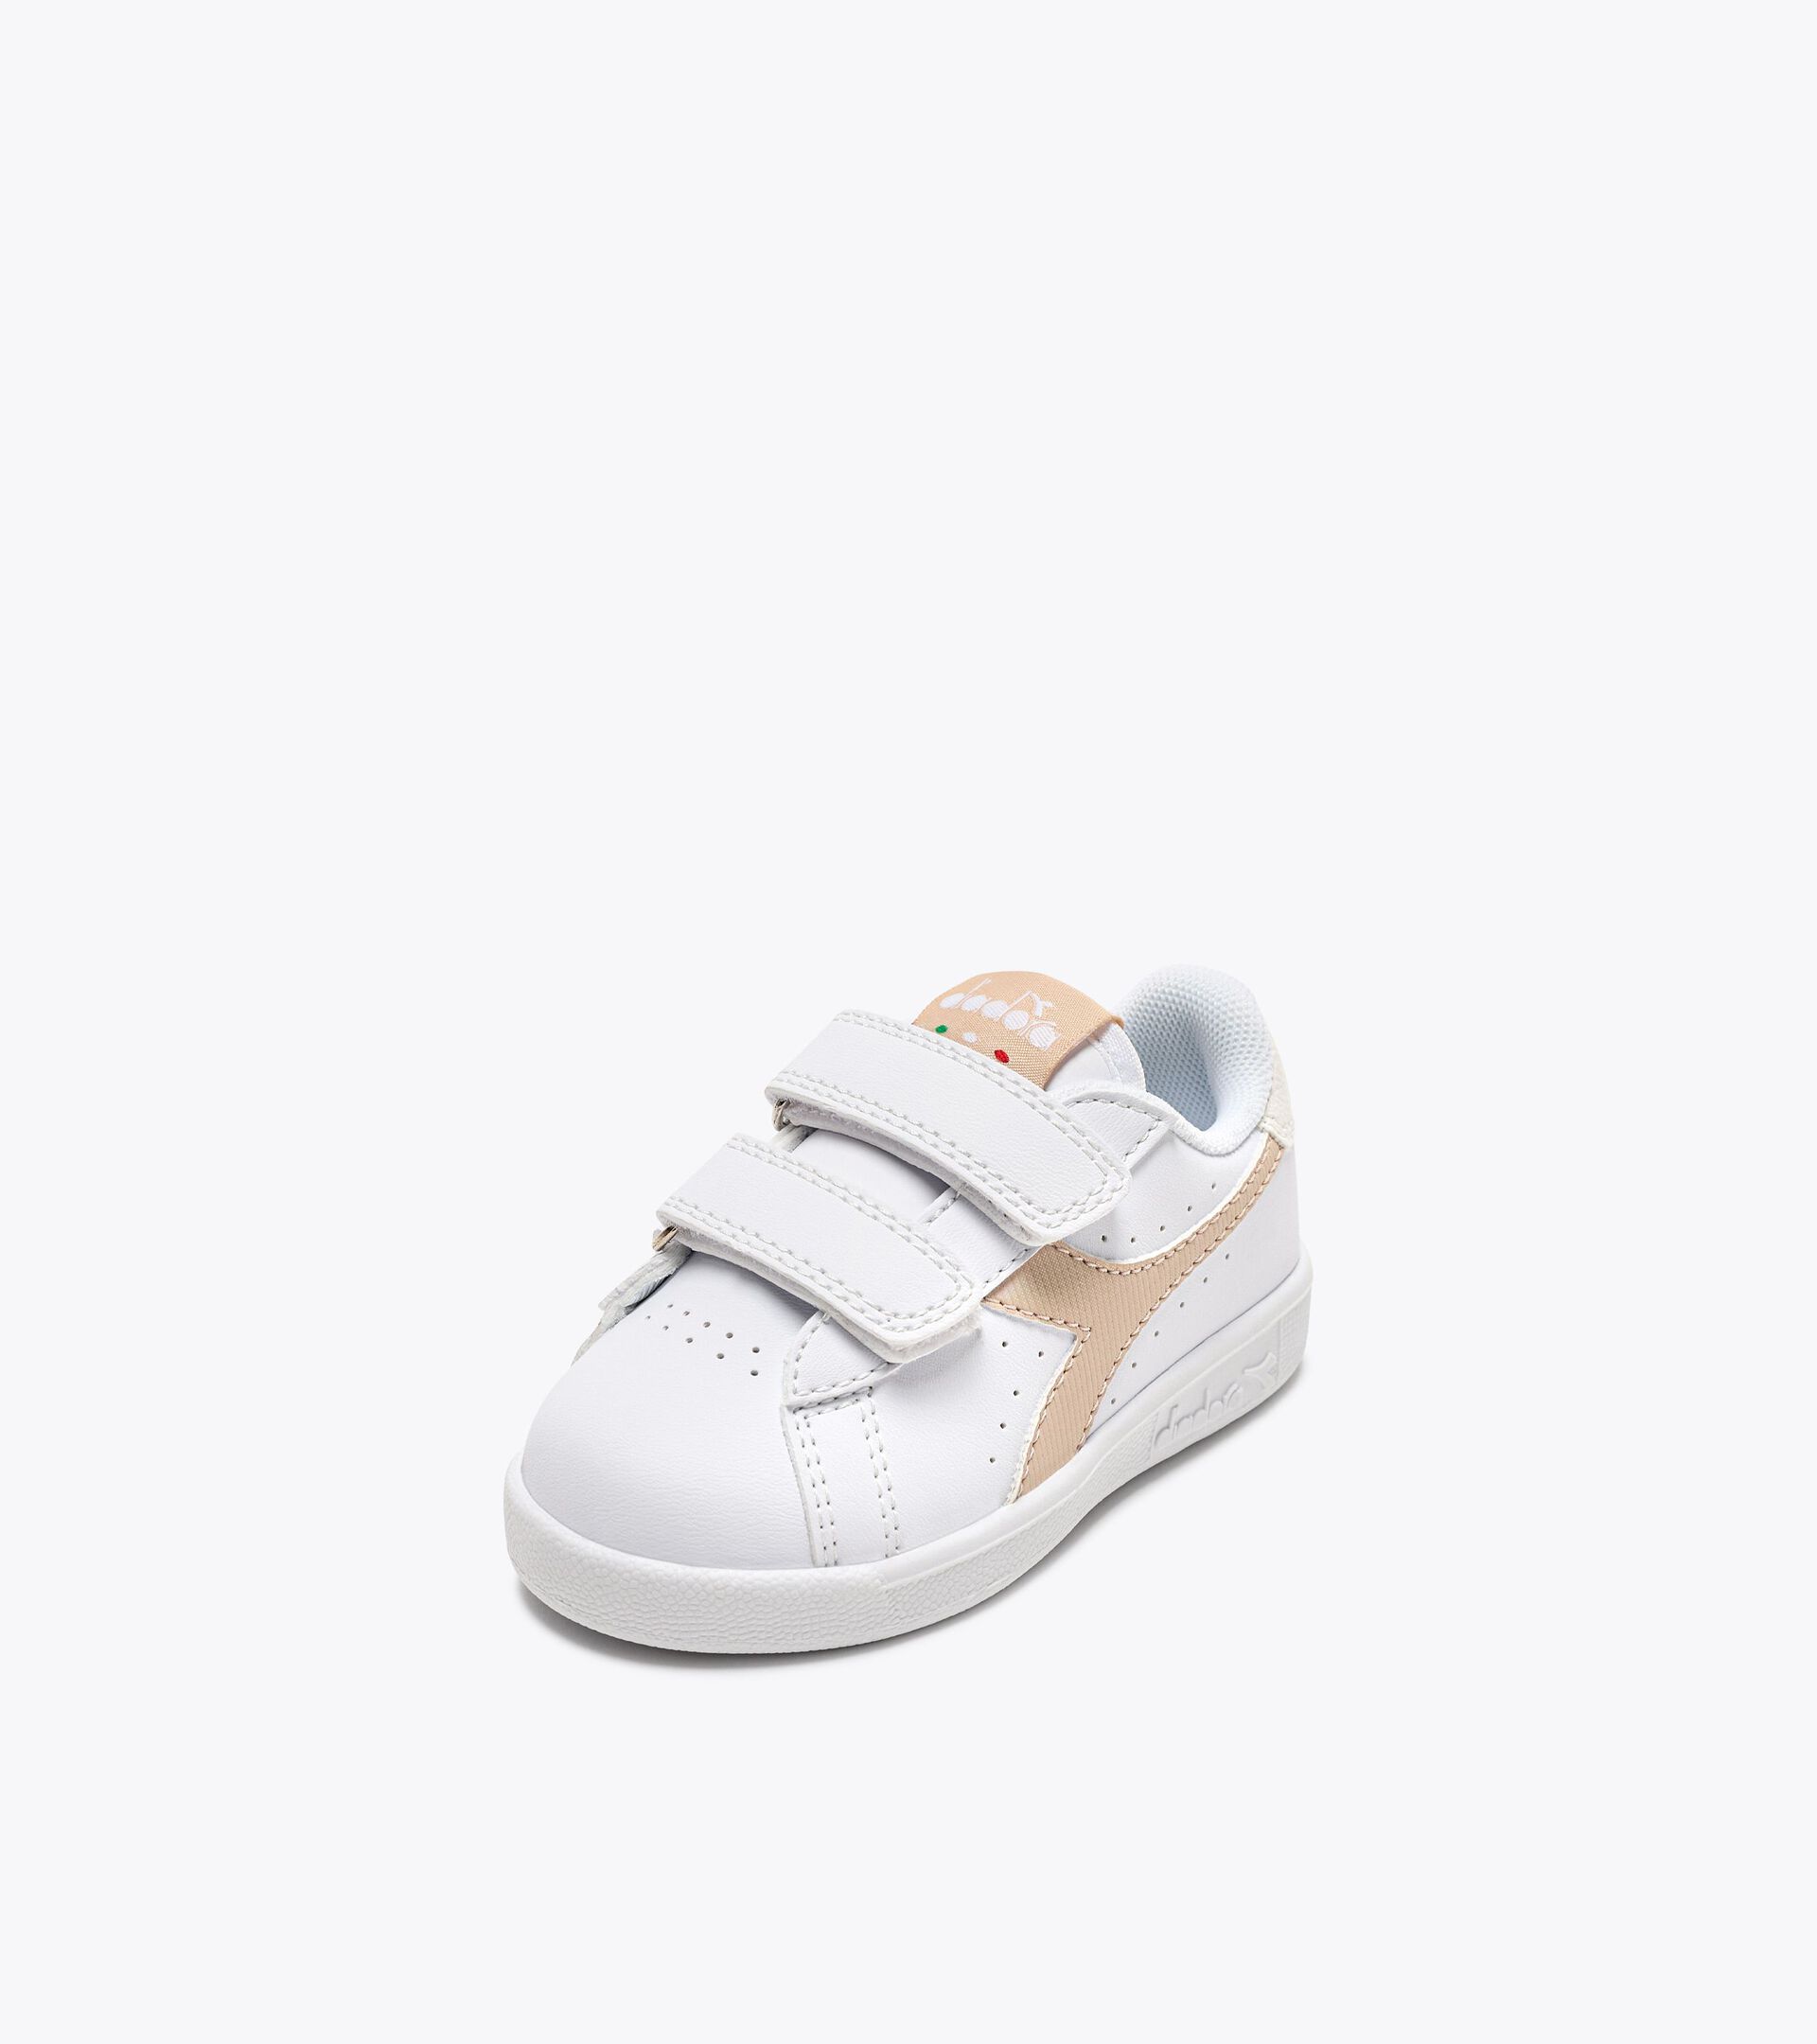 Sports shoes - Toddlers 1-4 years GAME P TD GIRL WHITE/WHISPER PINK - Diadora